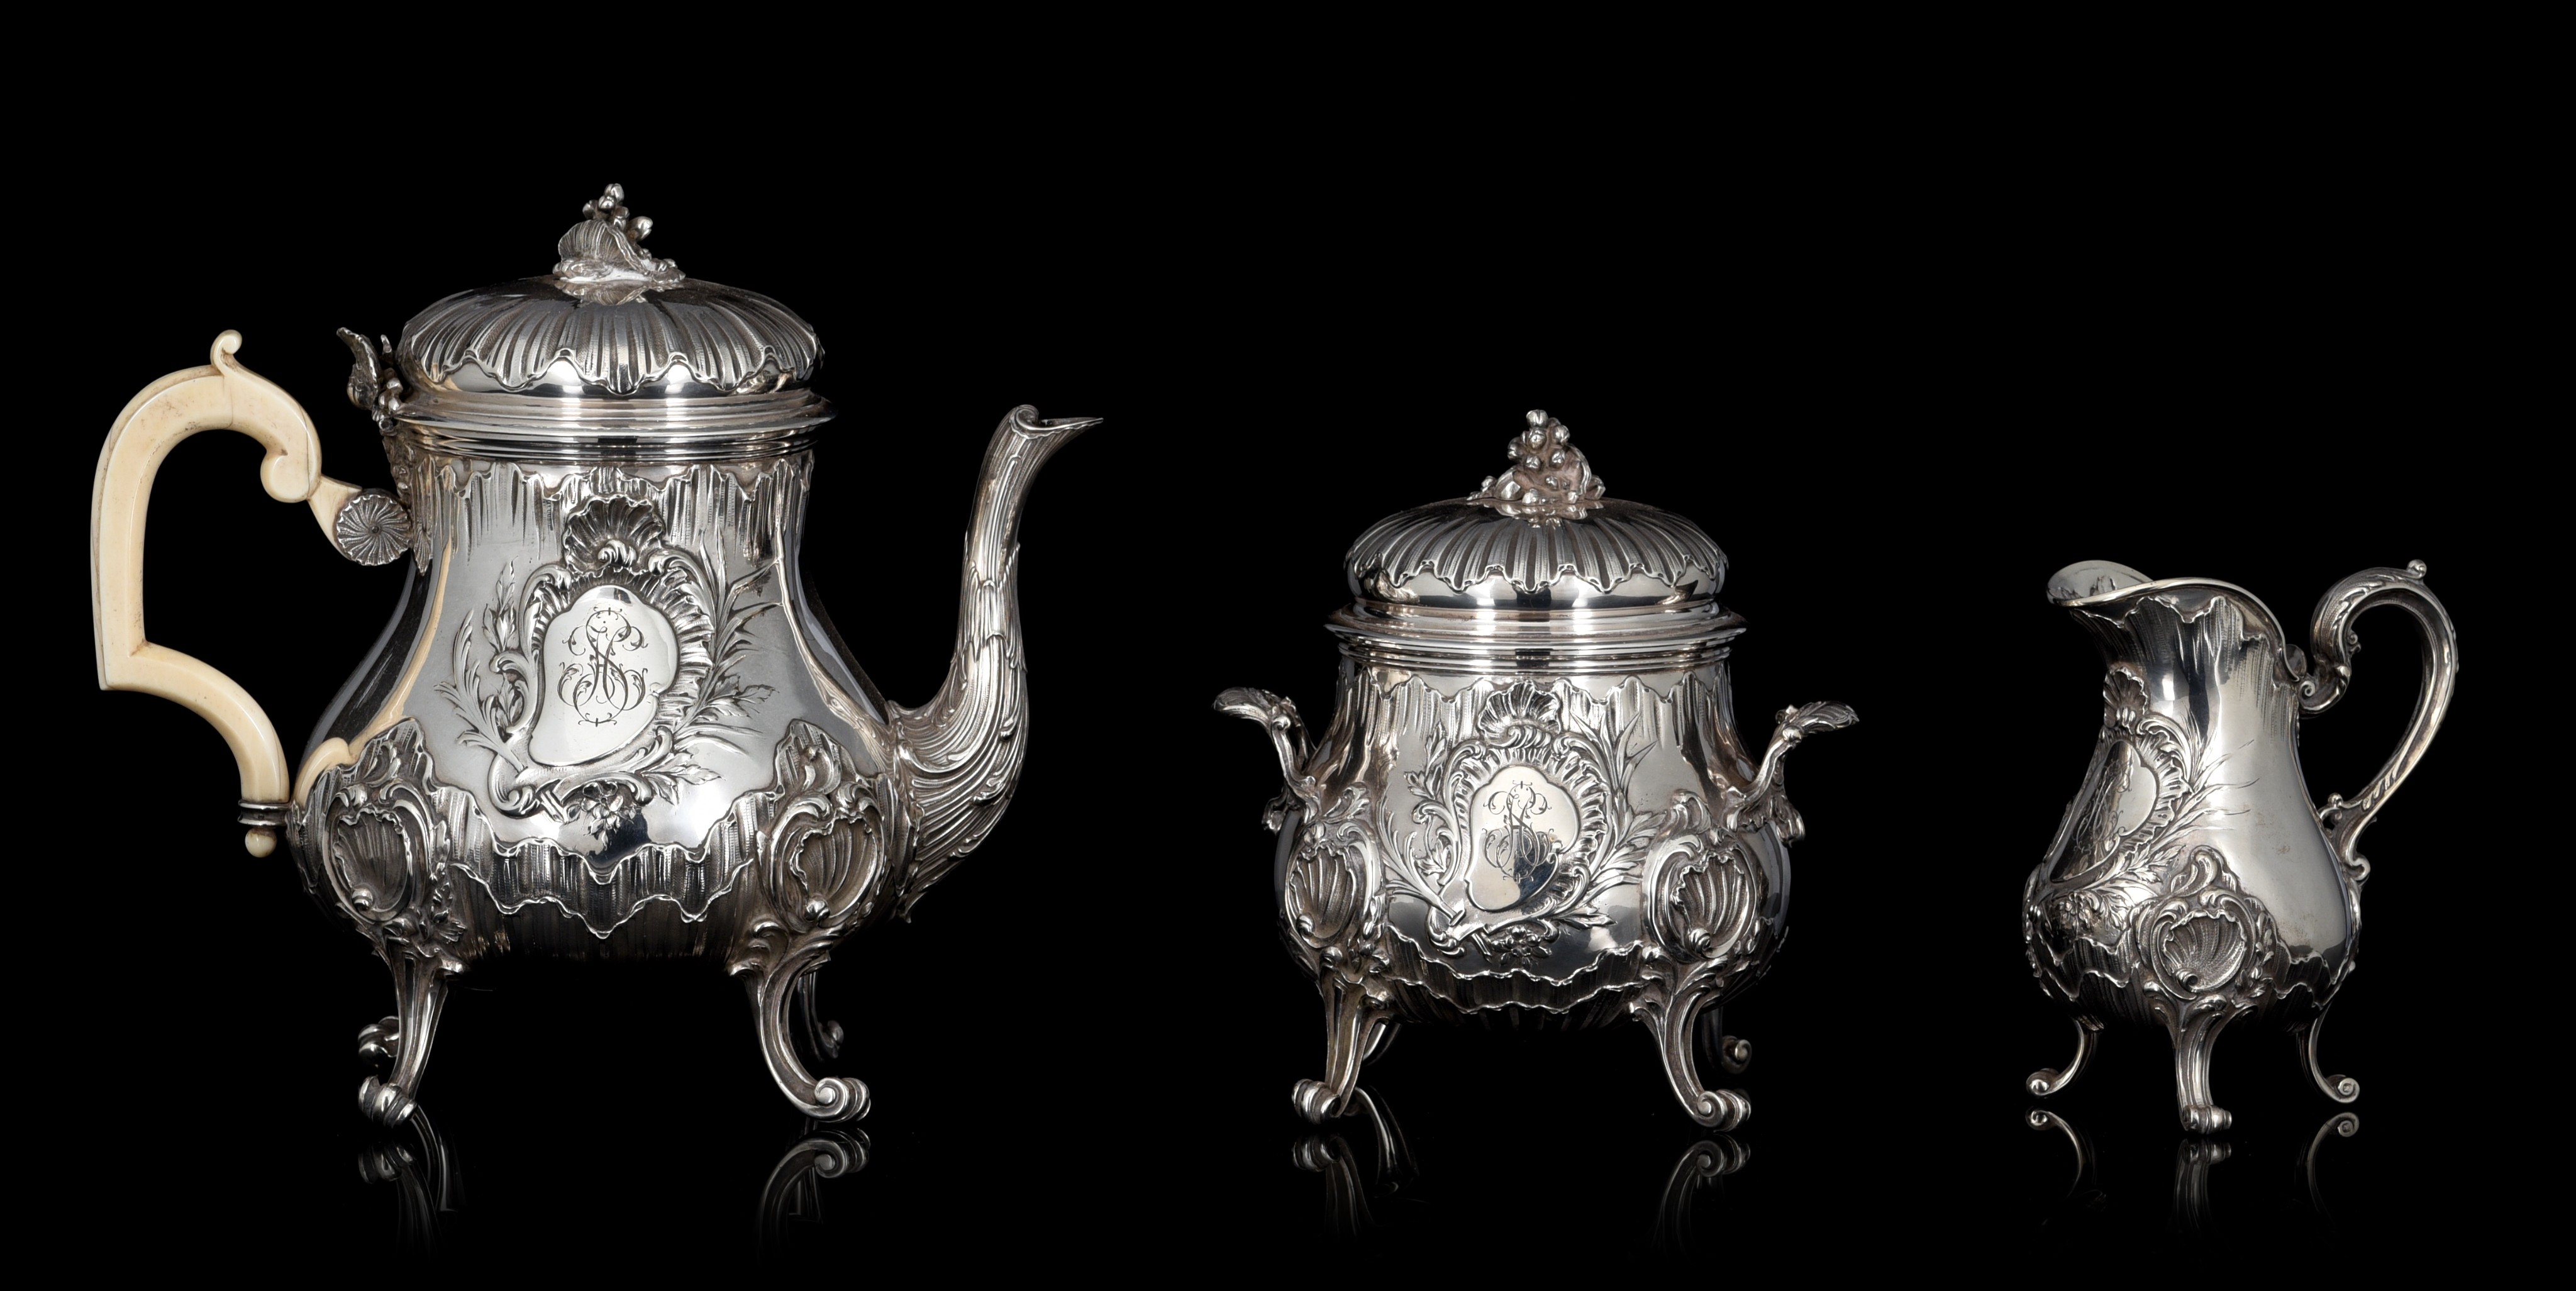 A French three-part silver Rococo Revival coffee set, 950/000, H 13,5 - 22,5 cm, c 1980 g